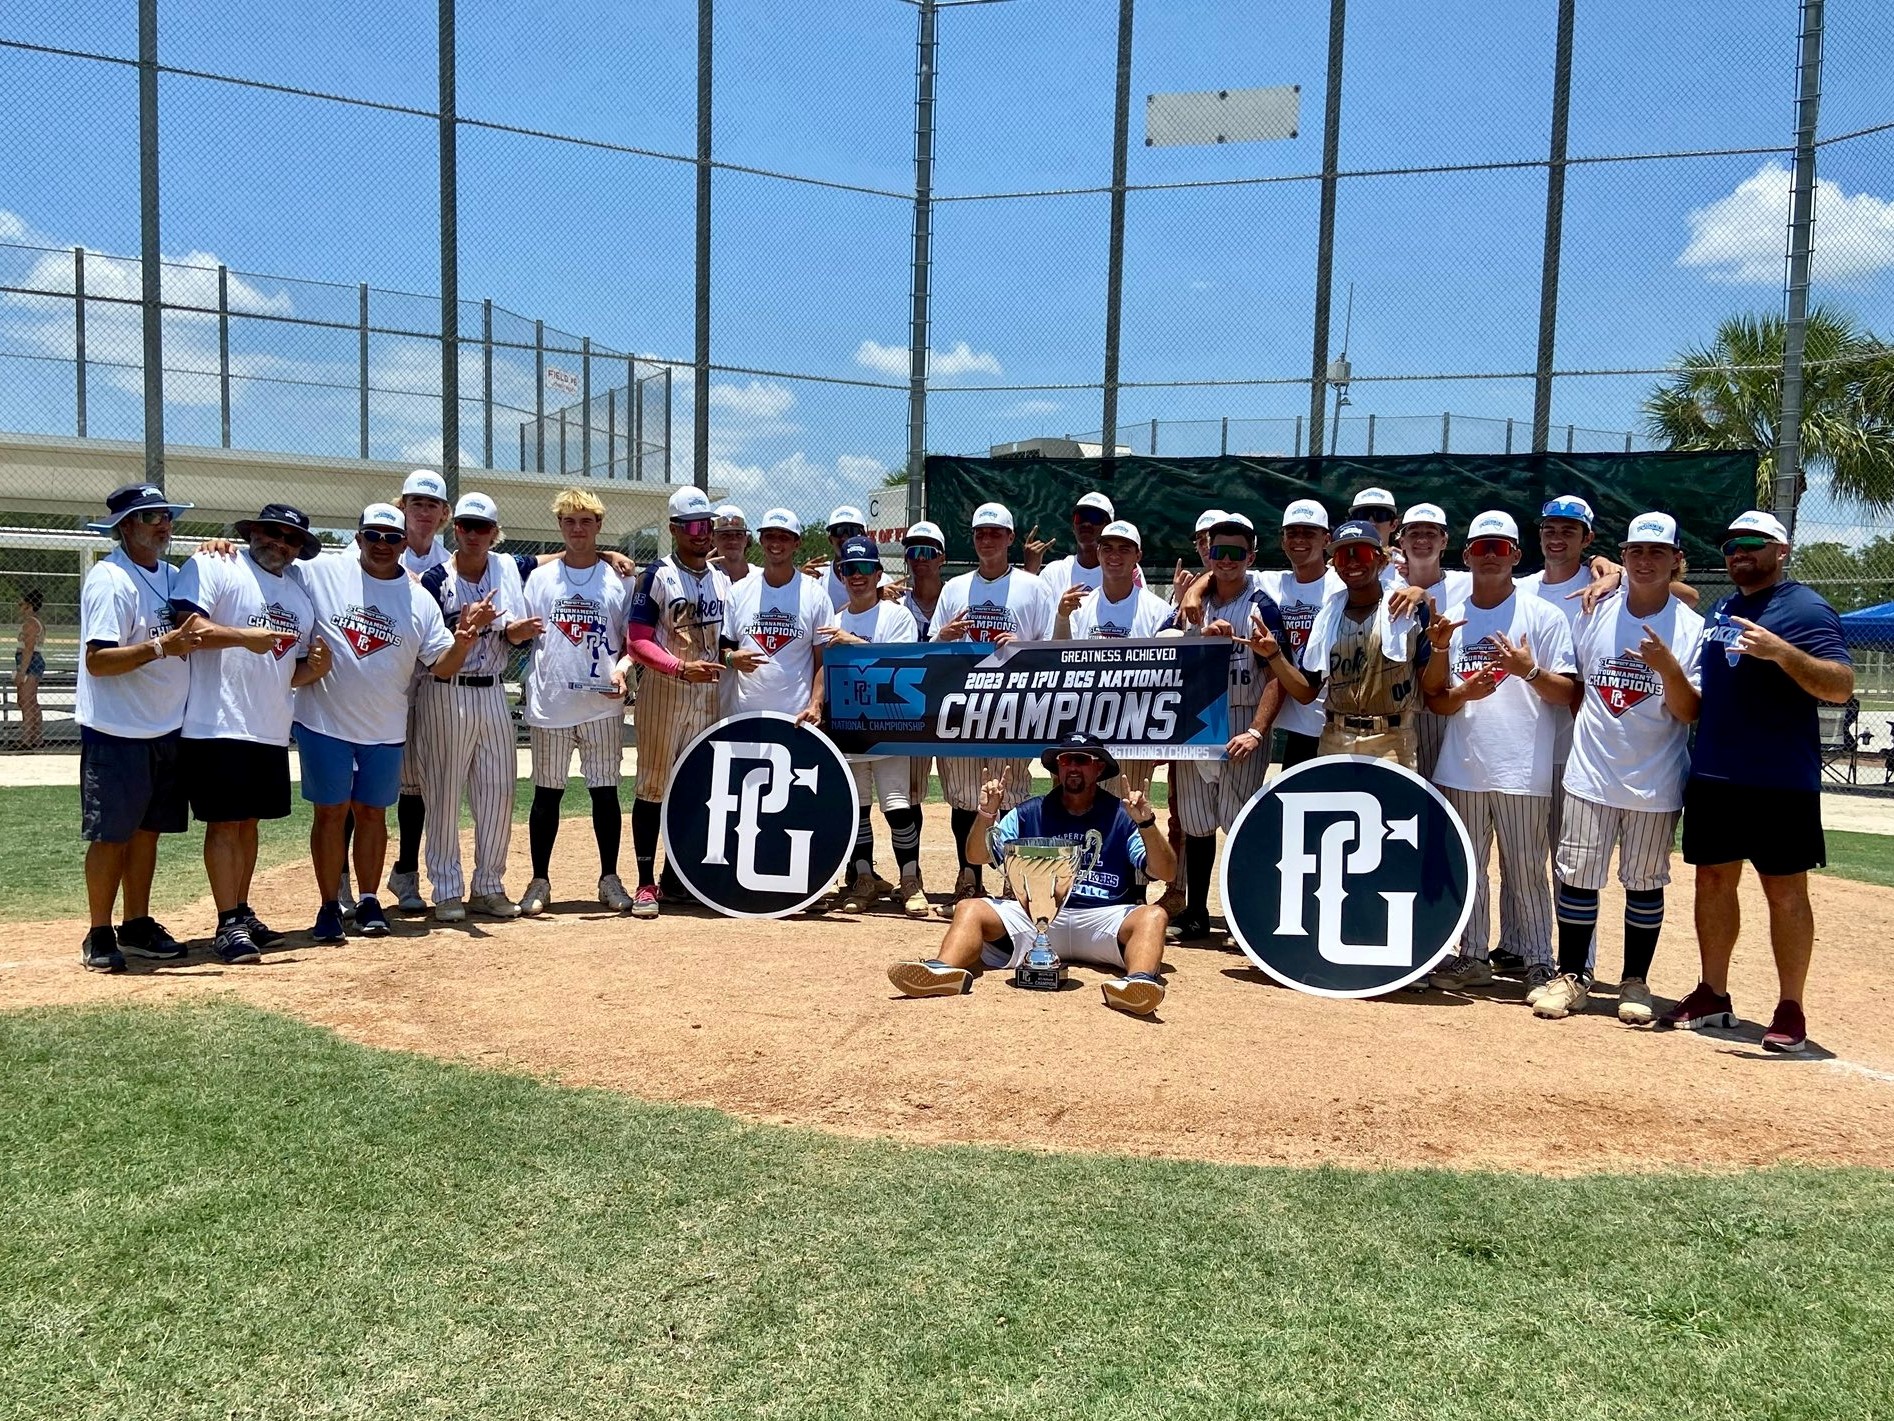 Original Florida Pokers go back-to-back at Perfect Game BCS National Championships